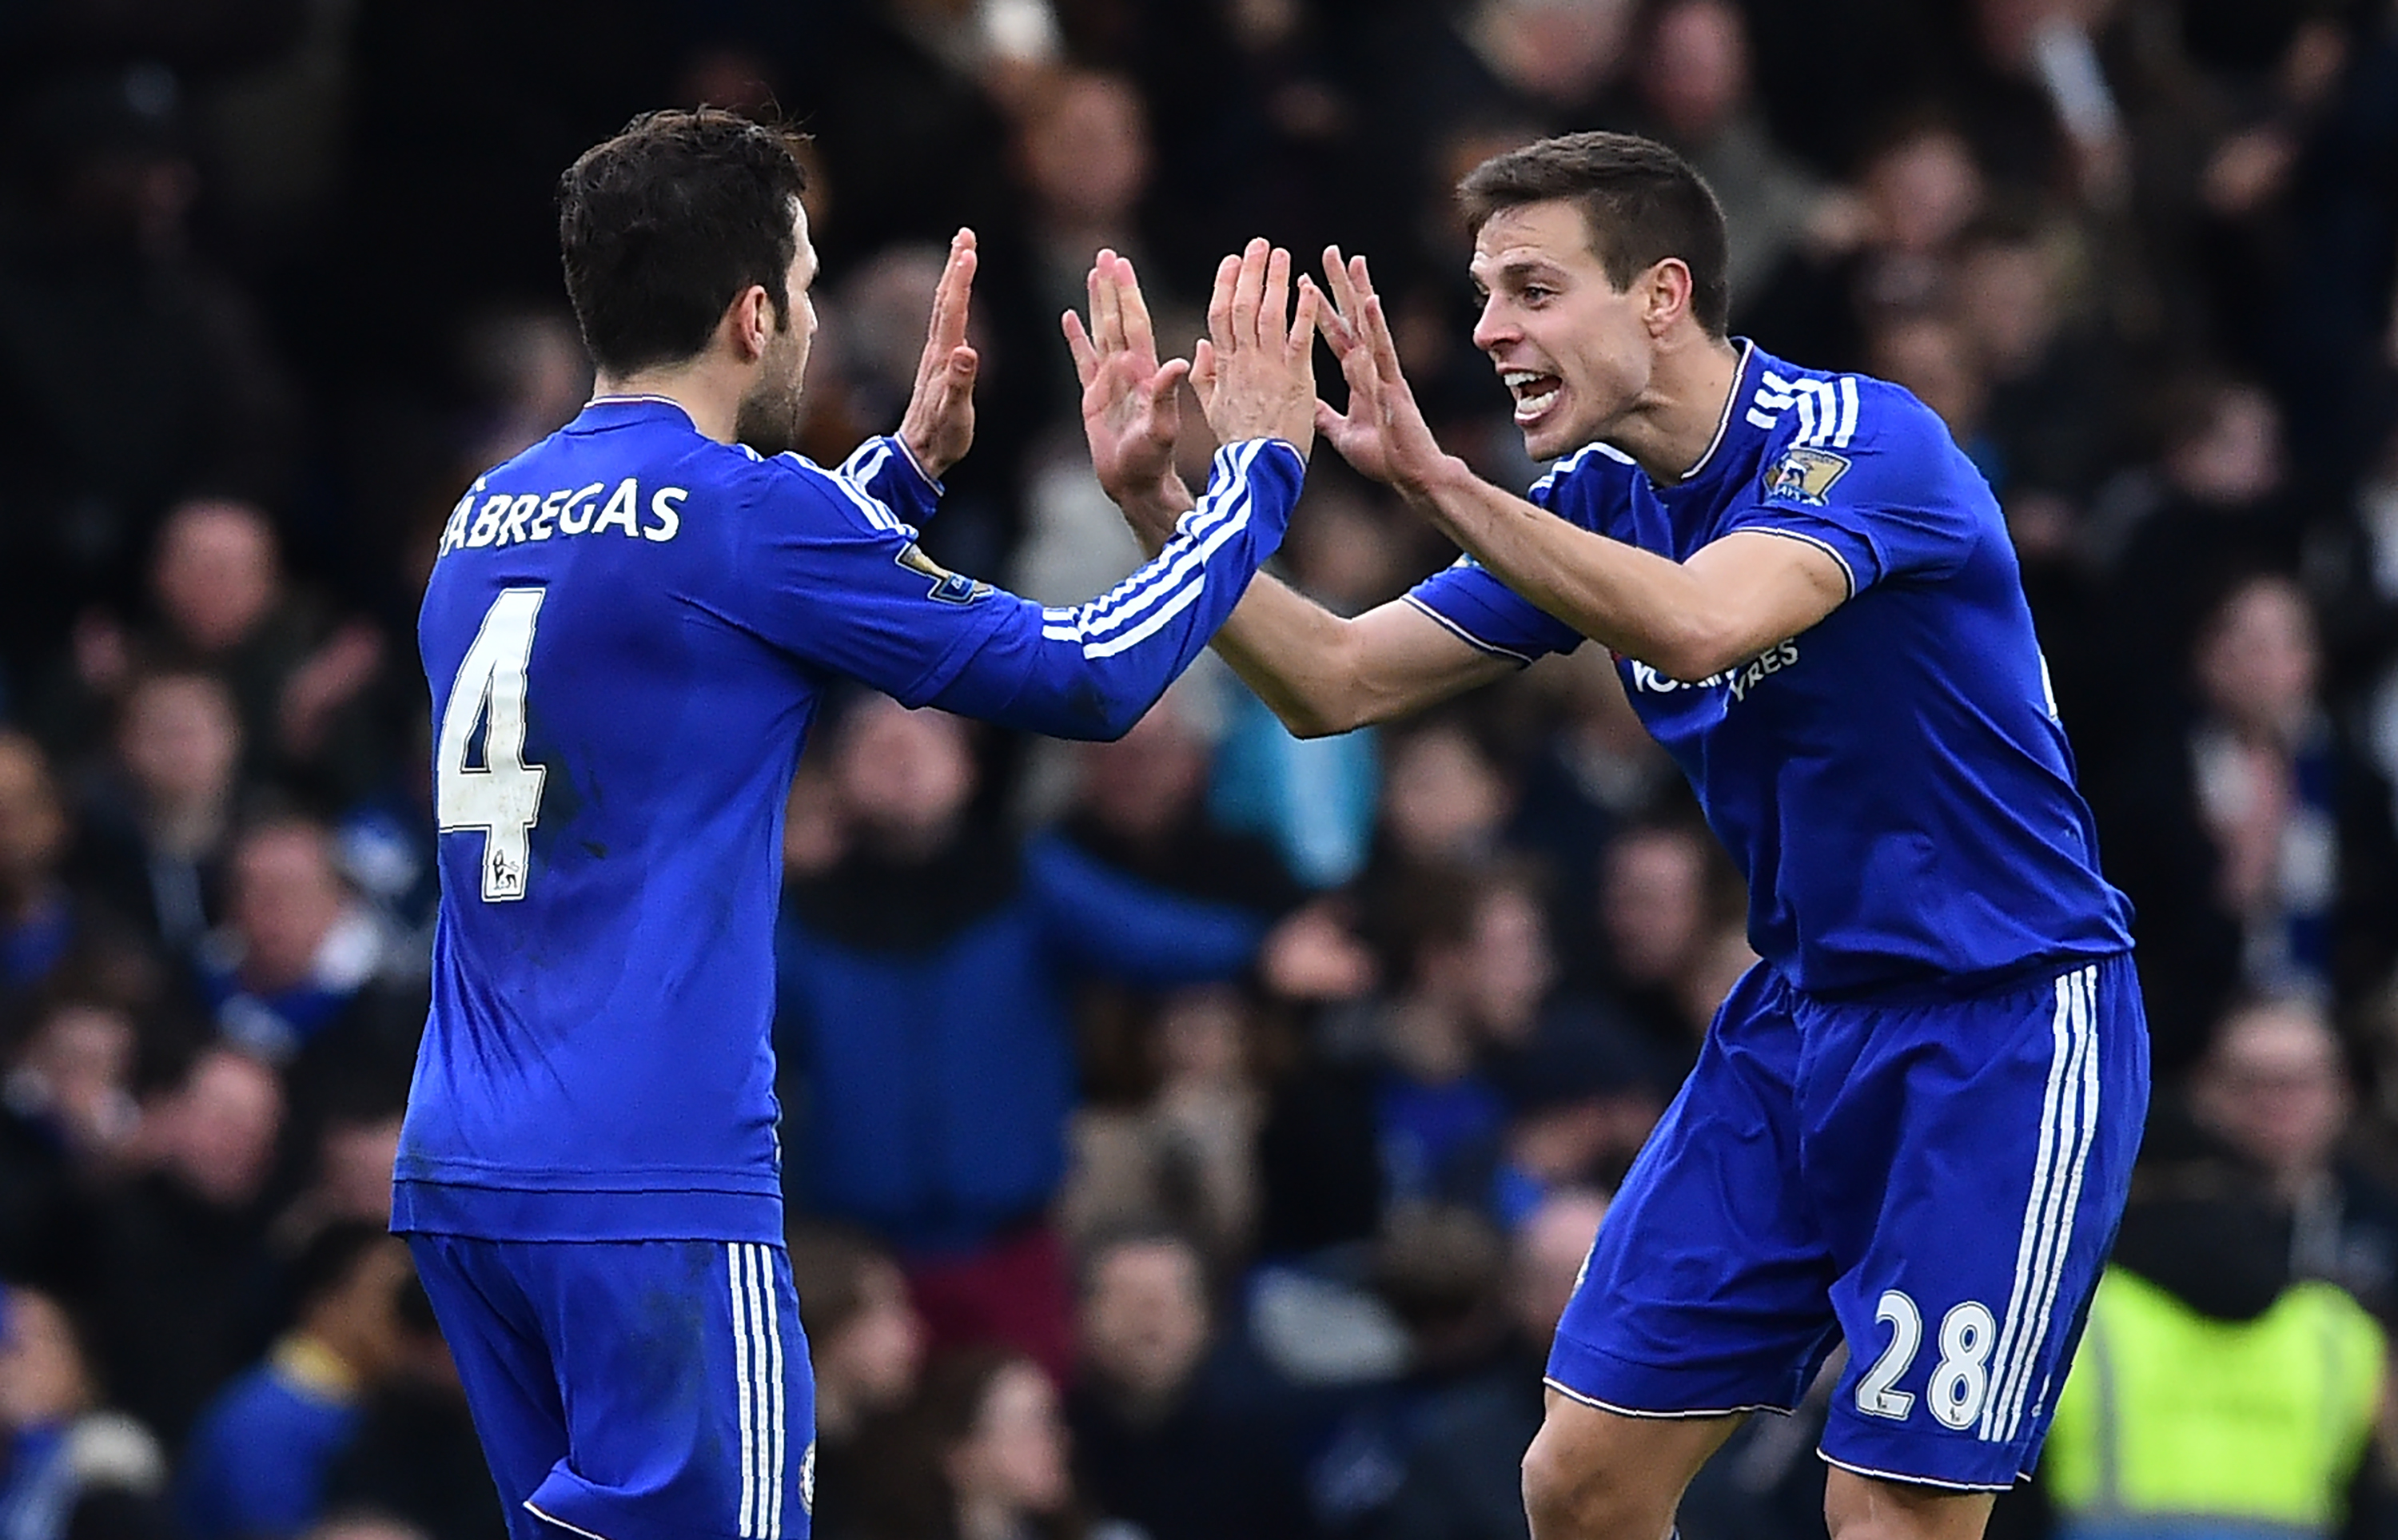 Chelsea's Spanish midfielder Cesc Fabregas (L) celebrates with Chelsea's Spanish defender Cesar Azpilicueta after scoring his penalty during the English Premier League football match between Chelsea and West Ham United at Stamford Bridge in London on March 19, 2016.
The game finished 2-2. / AFP / Ben STANSALL / RESTRICTED TO EDITORIAL USE. No use with unauthorized audio, video, data, fixture lists, club/league logos or 'live' services. Online in-match use limited to 75 images, no video emulation. No use in betting, games or single club/league/player publications.  /         (Photo credit should read BEN STANSALL/AFP/Getty Images)